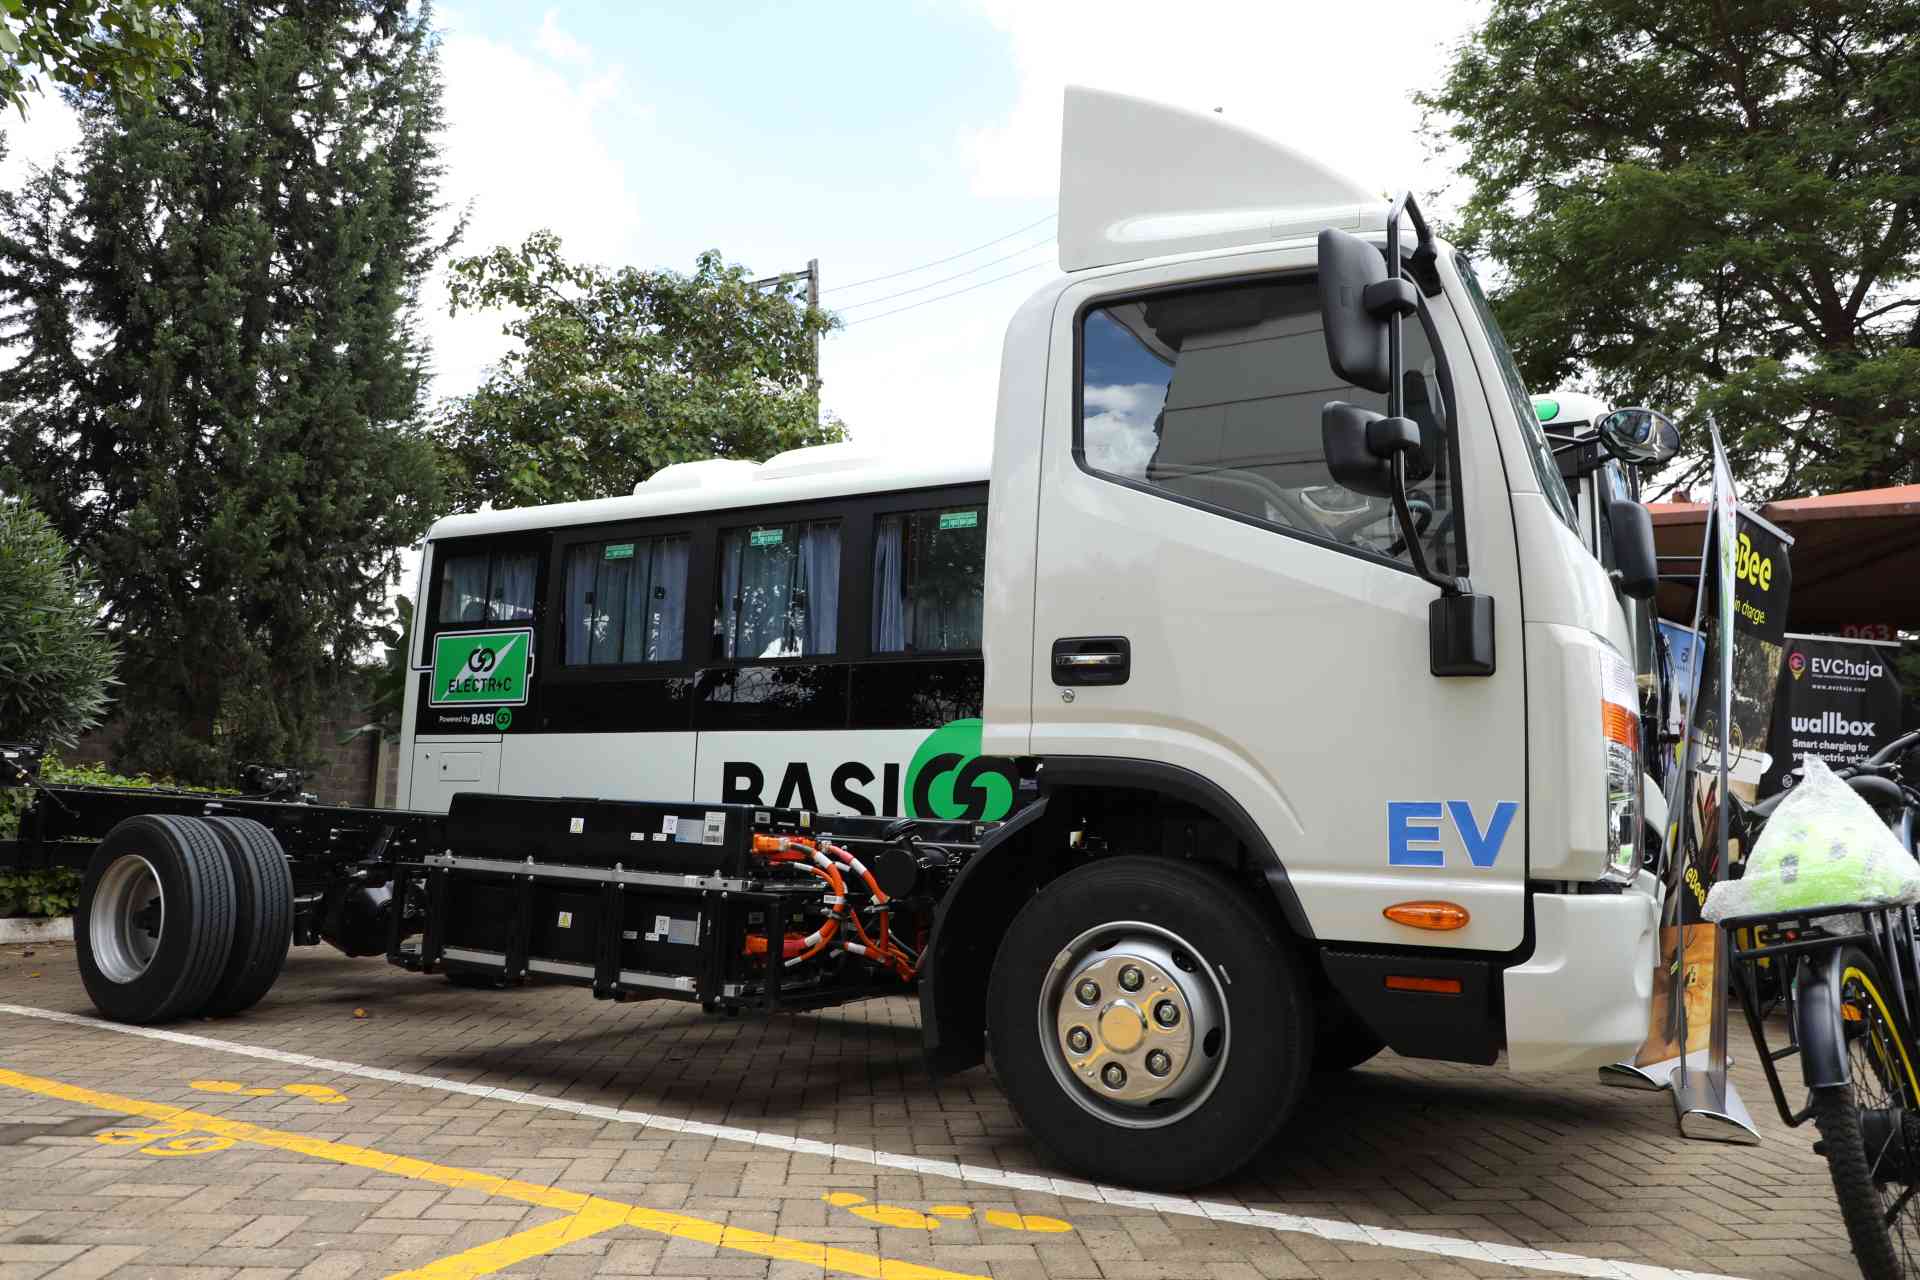 The Electric Truck from Ectar